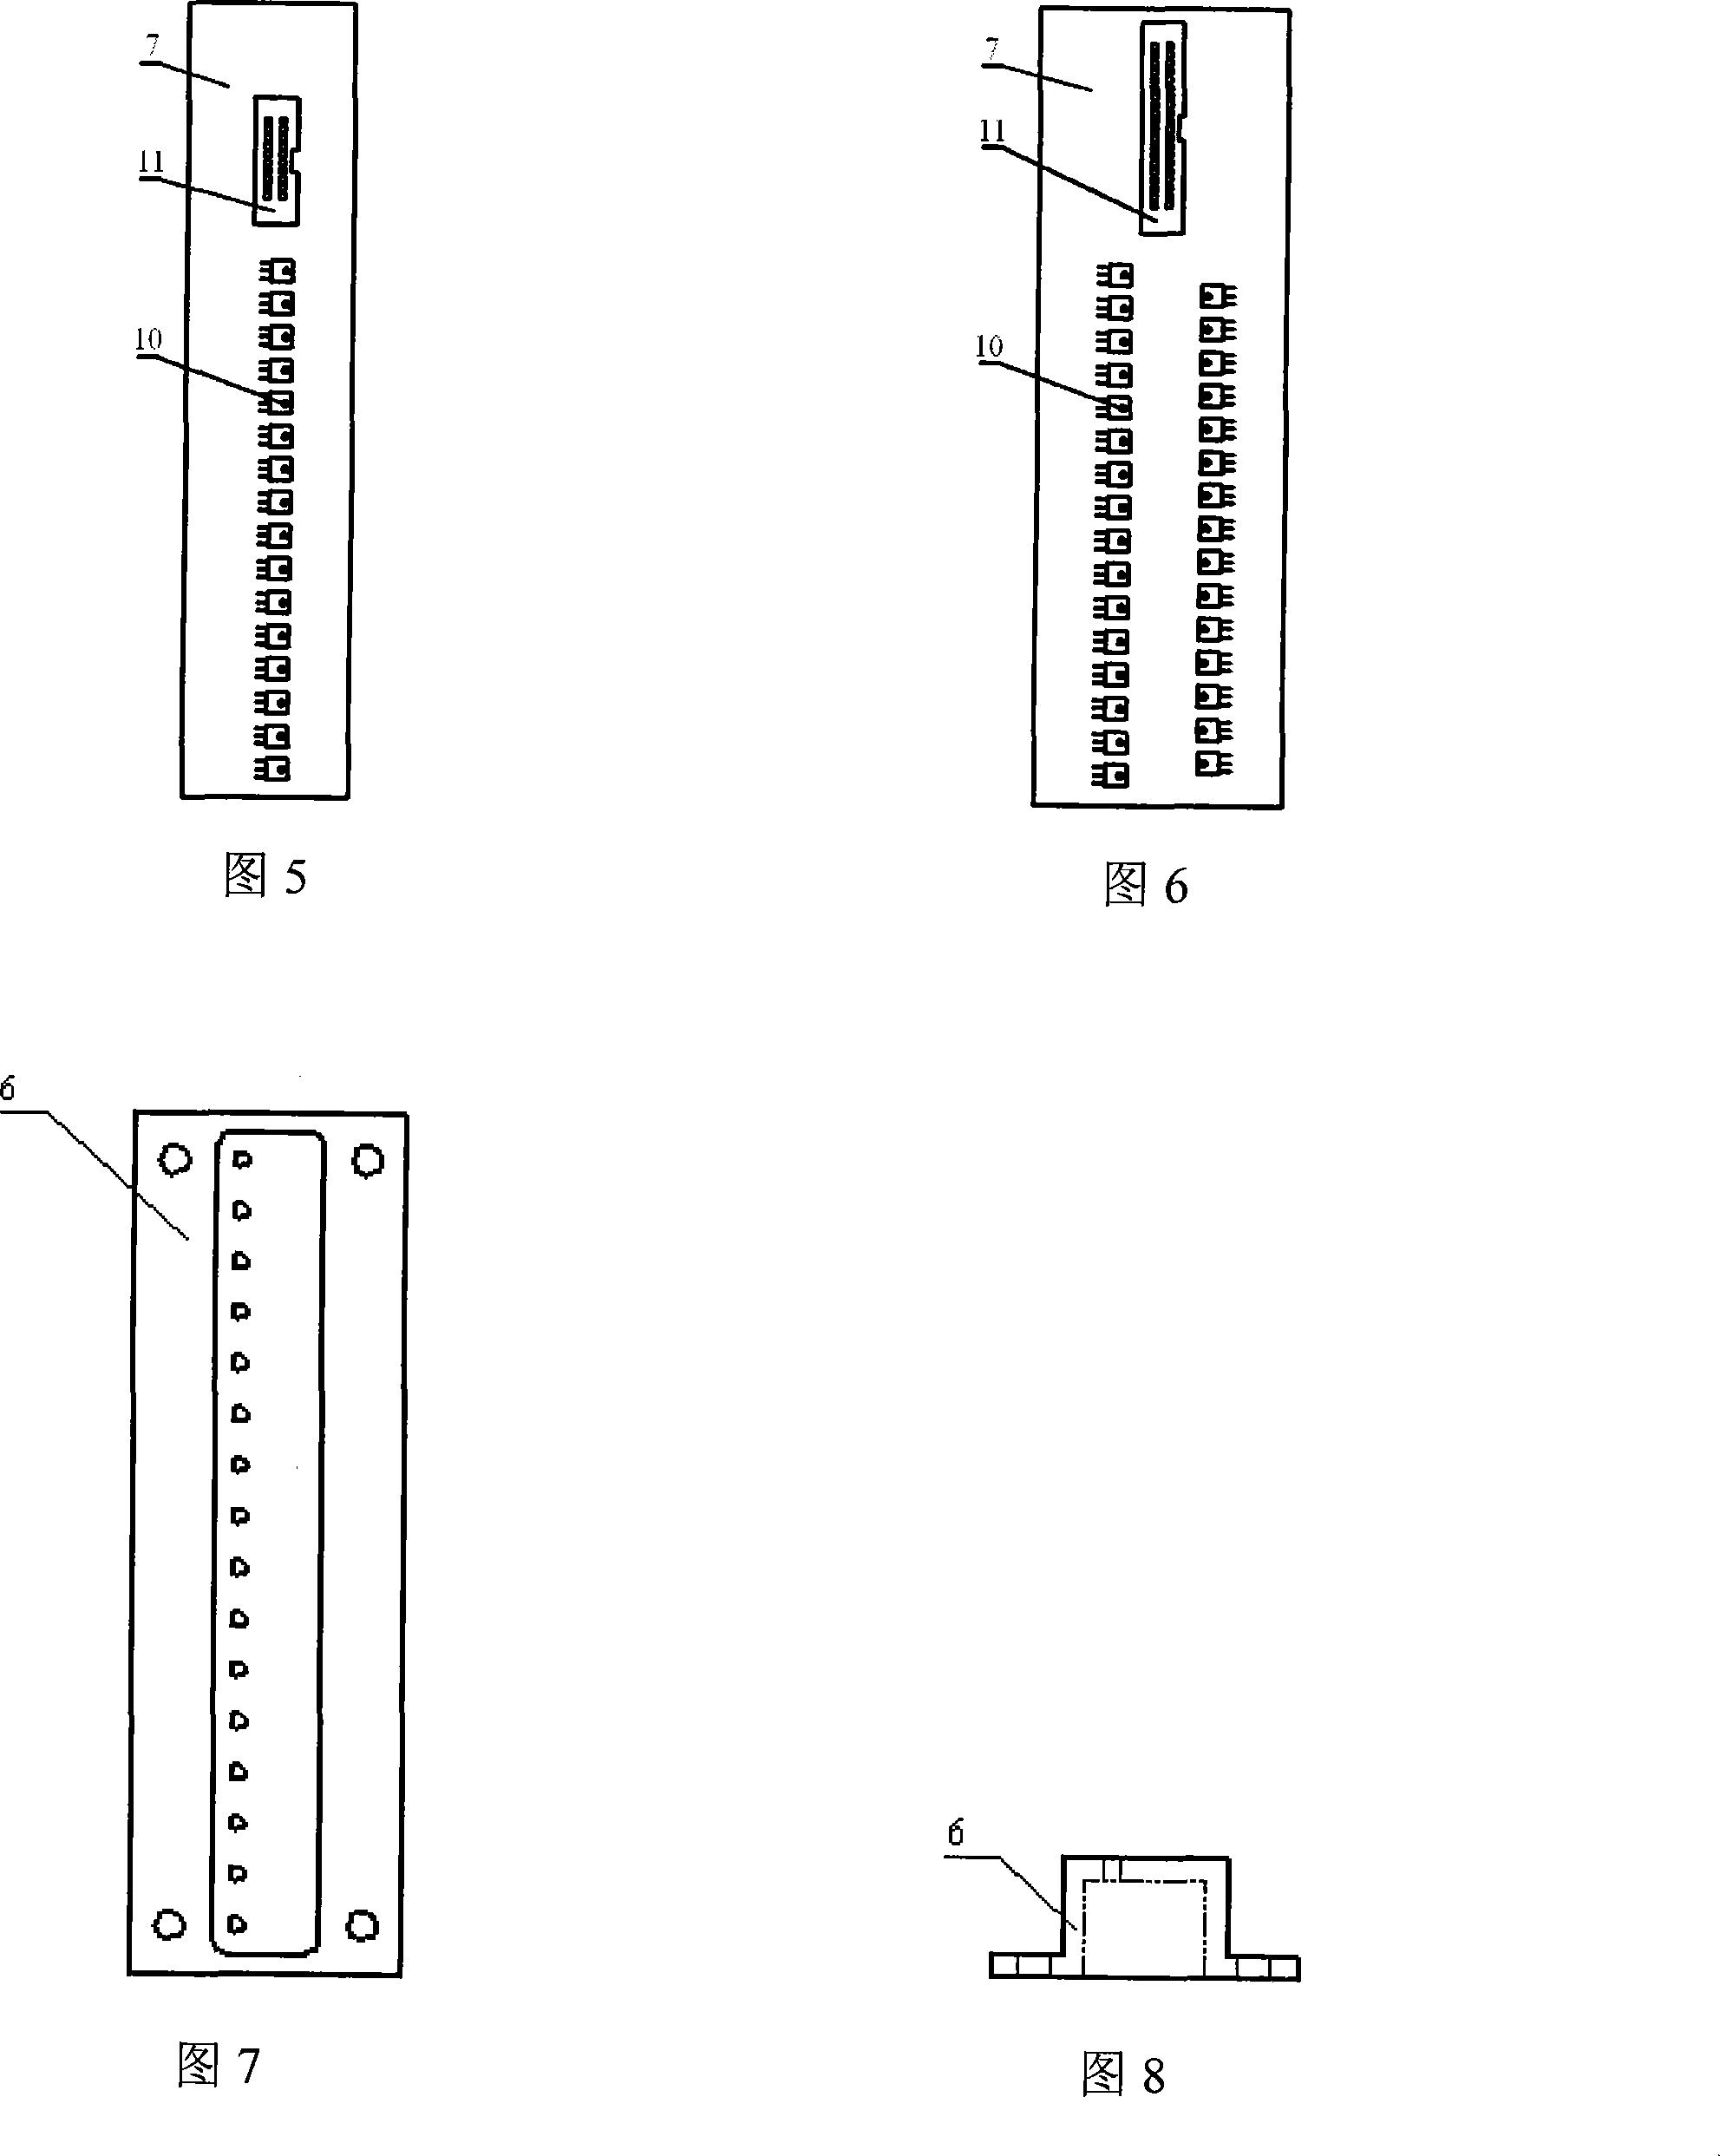 Device for detecting lighter flame height